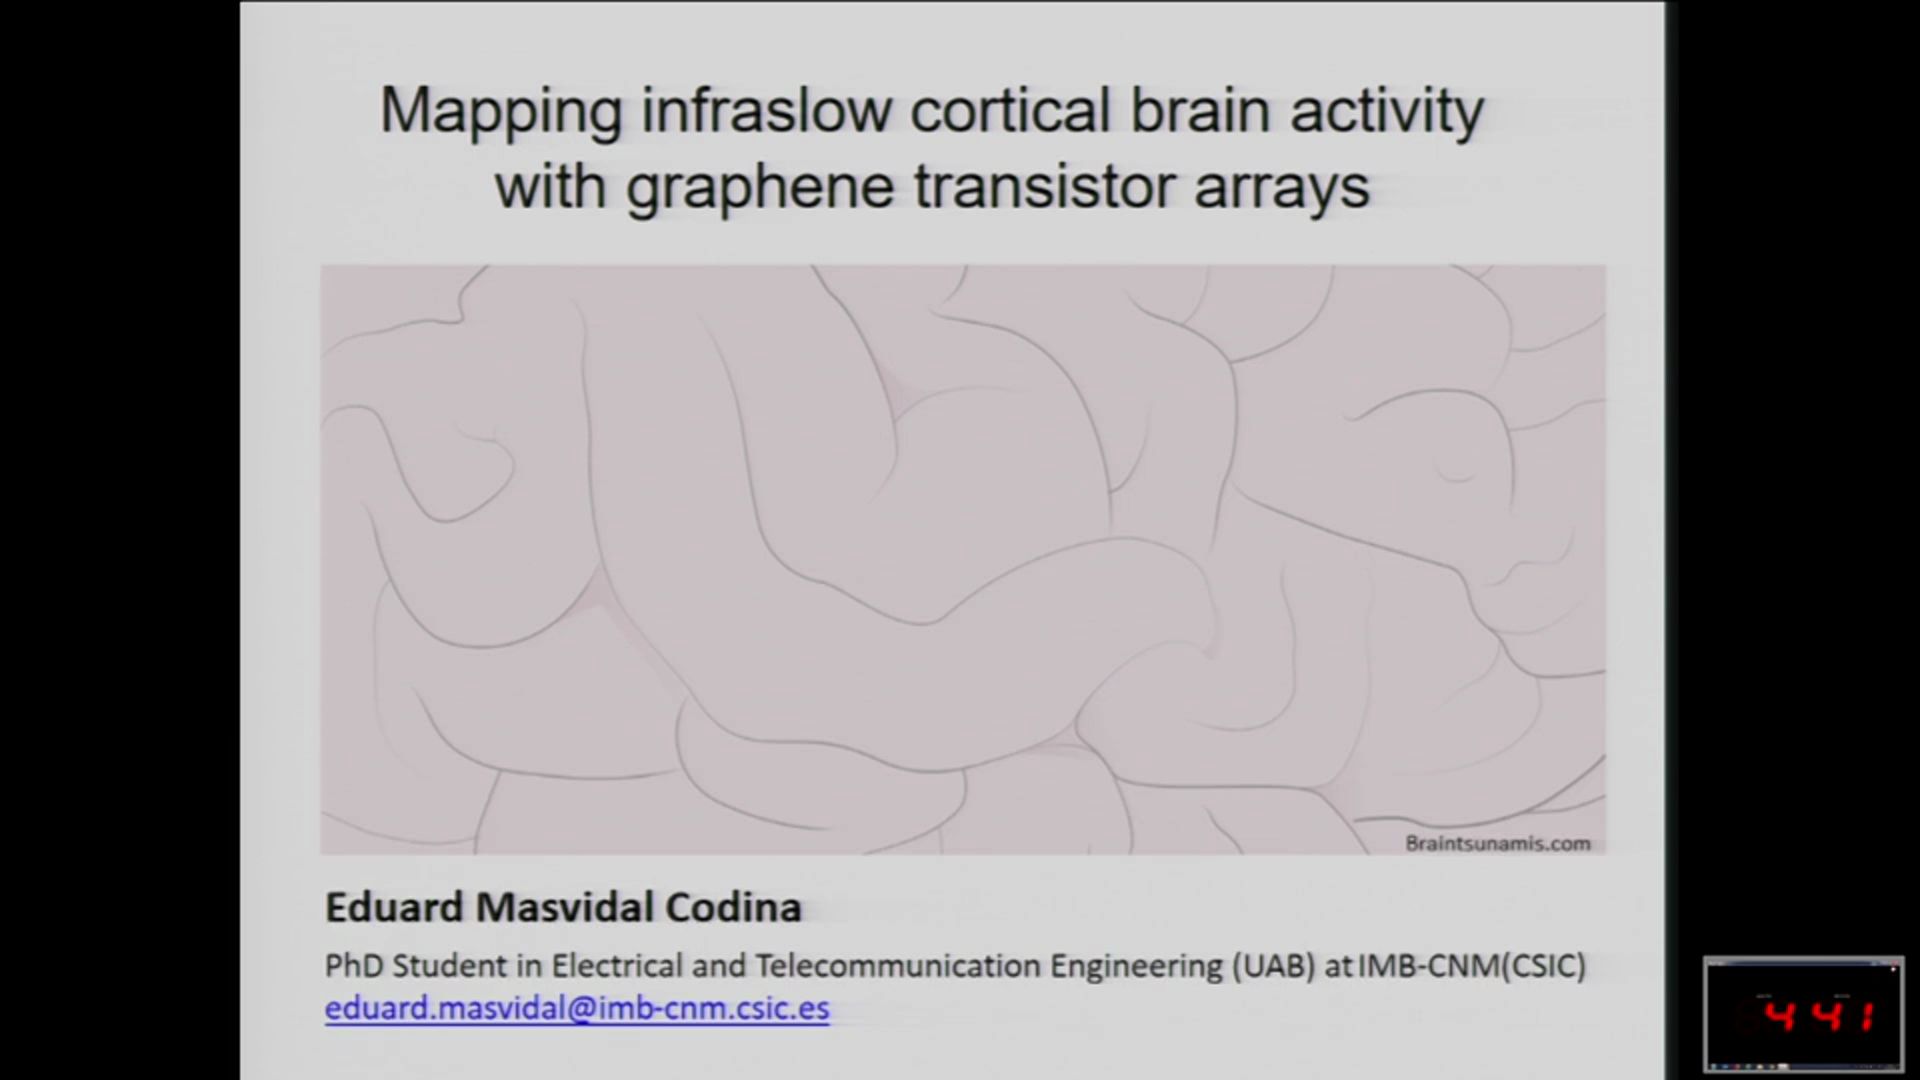 Mapping infraslow cortical brain activity with graphene transistor arrays